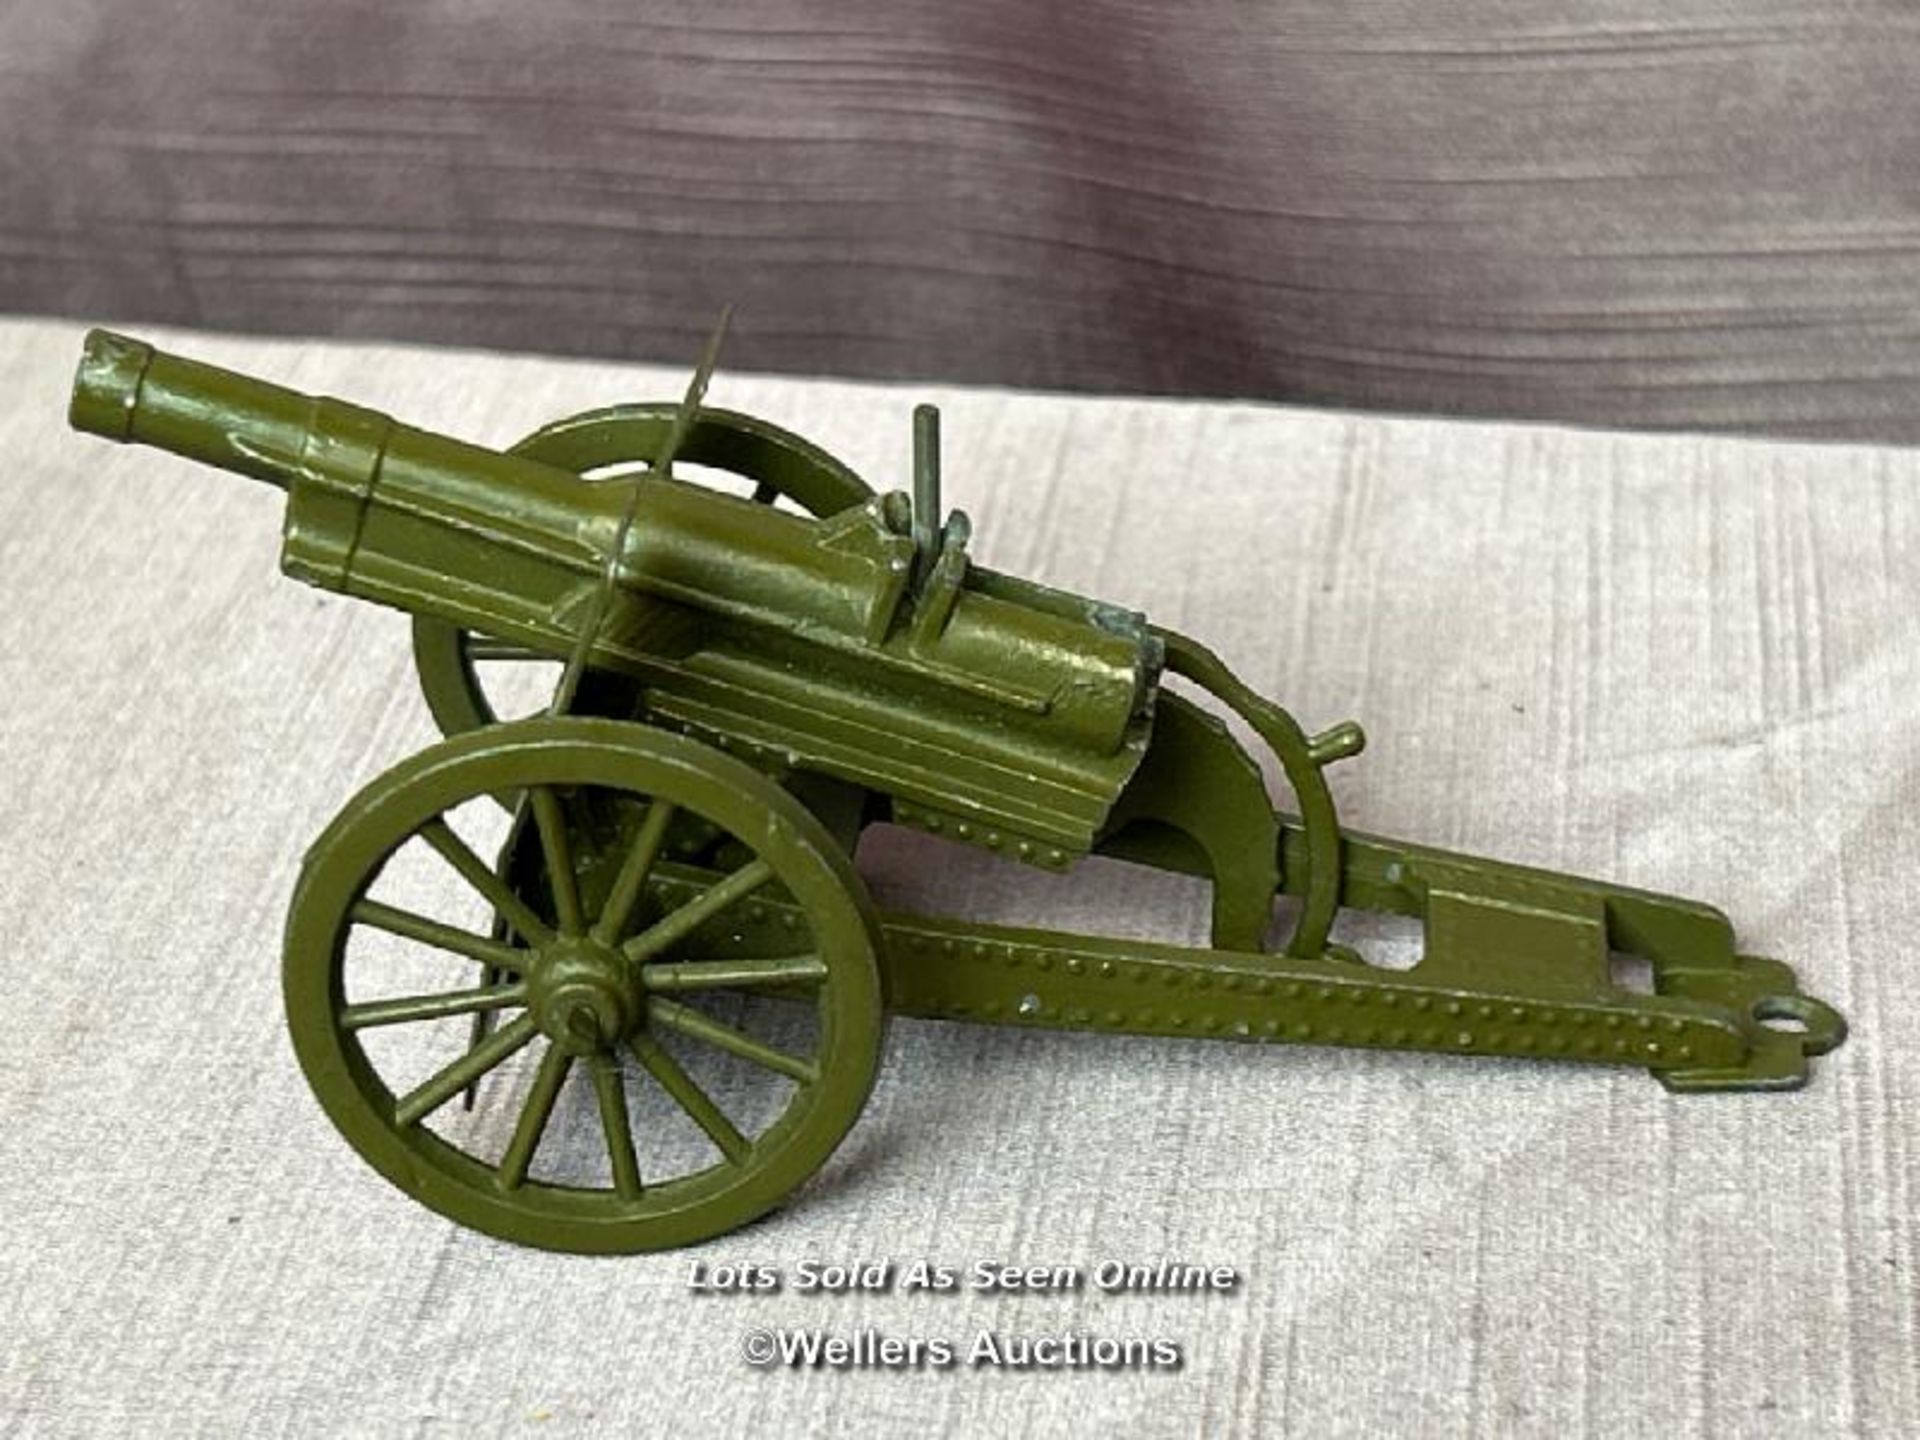 TWO DINKY DIE CAST MILITARY MODELS INCLUDING ONE TONNE CARGO TRUCK NO. 614 AND A MOBILE CANNON - Image 4 of 5